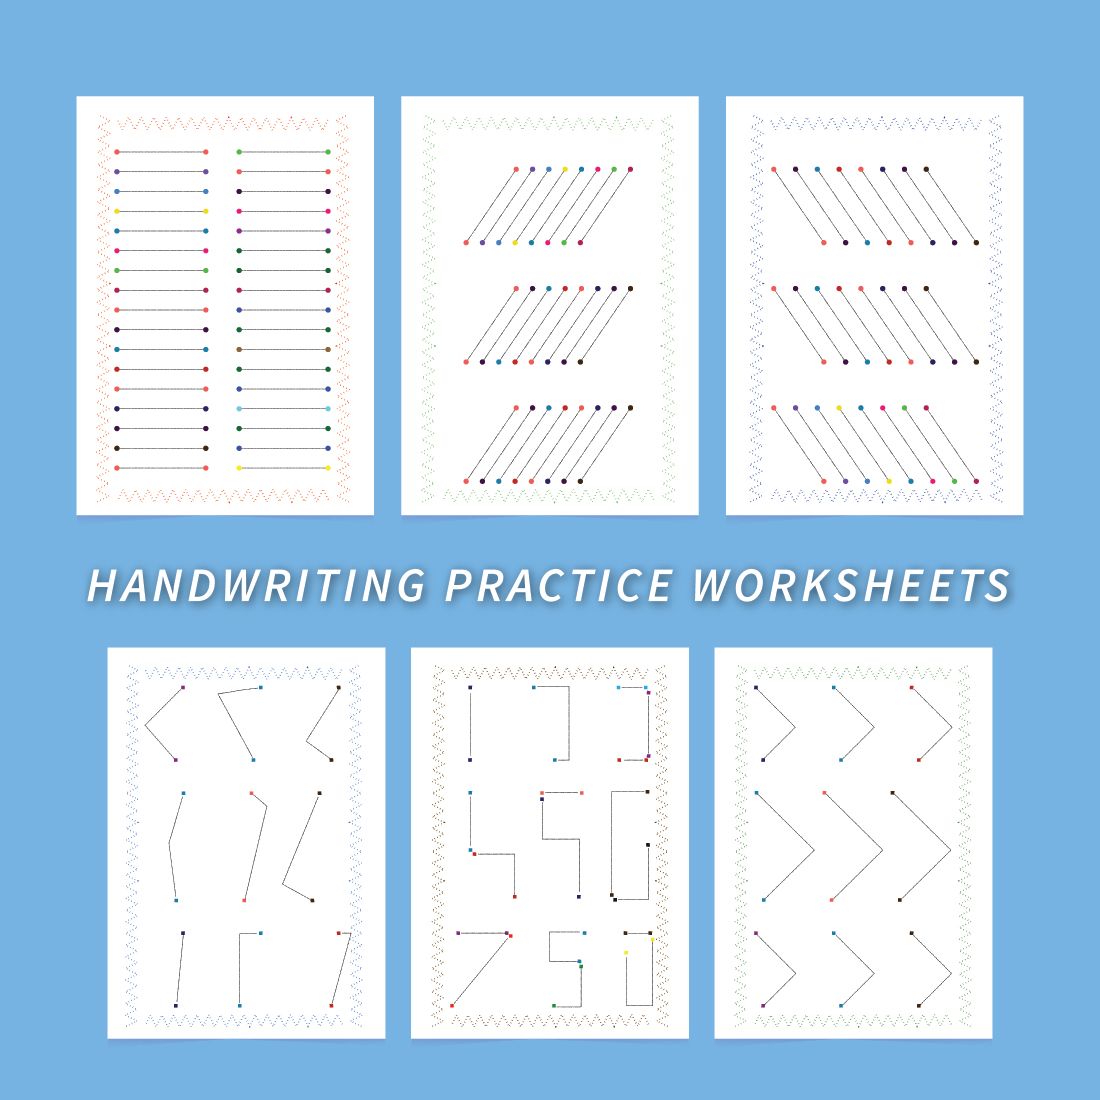 Handwriting Practice Worksheets cover image.